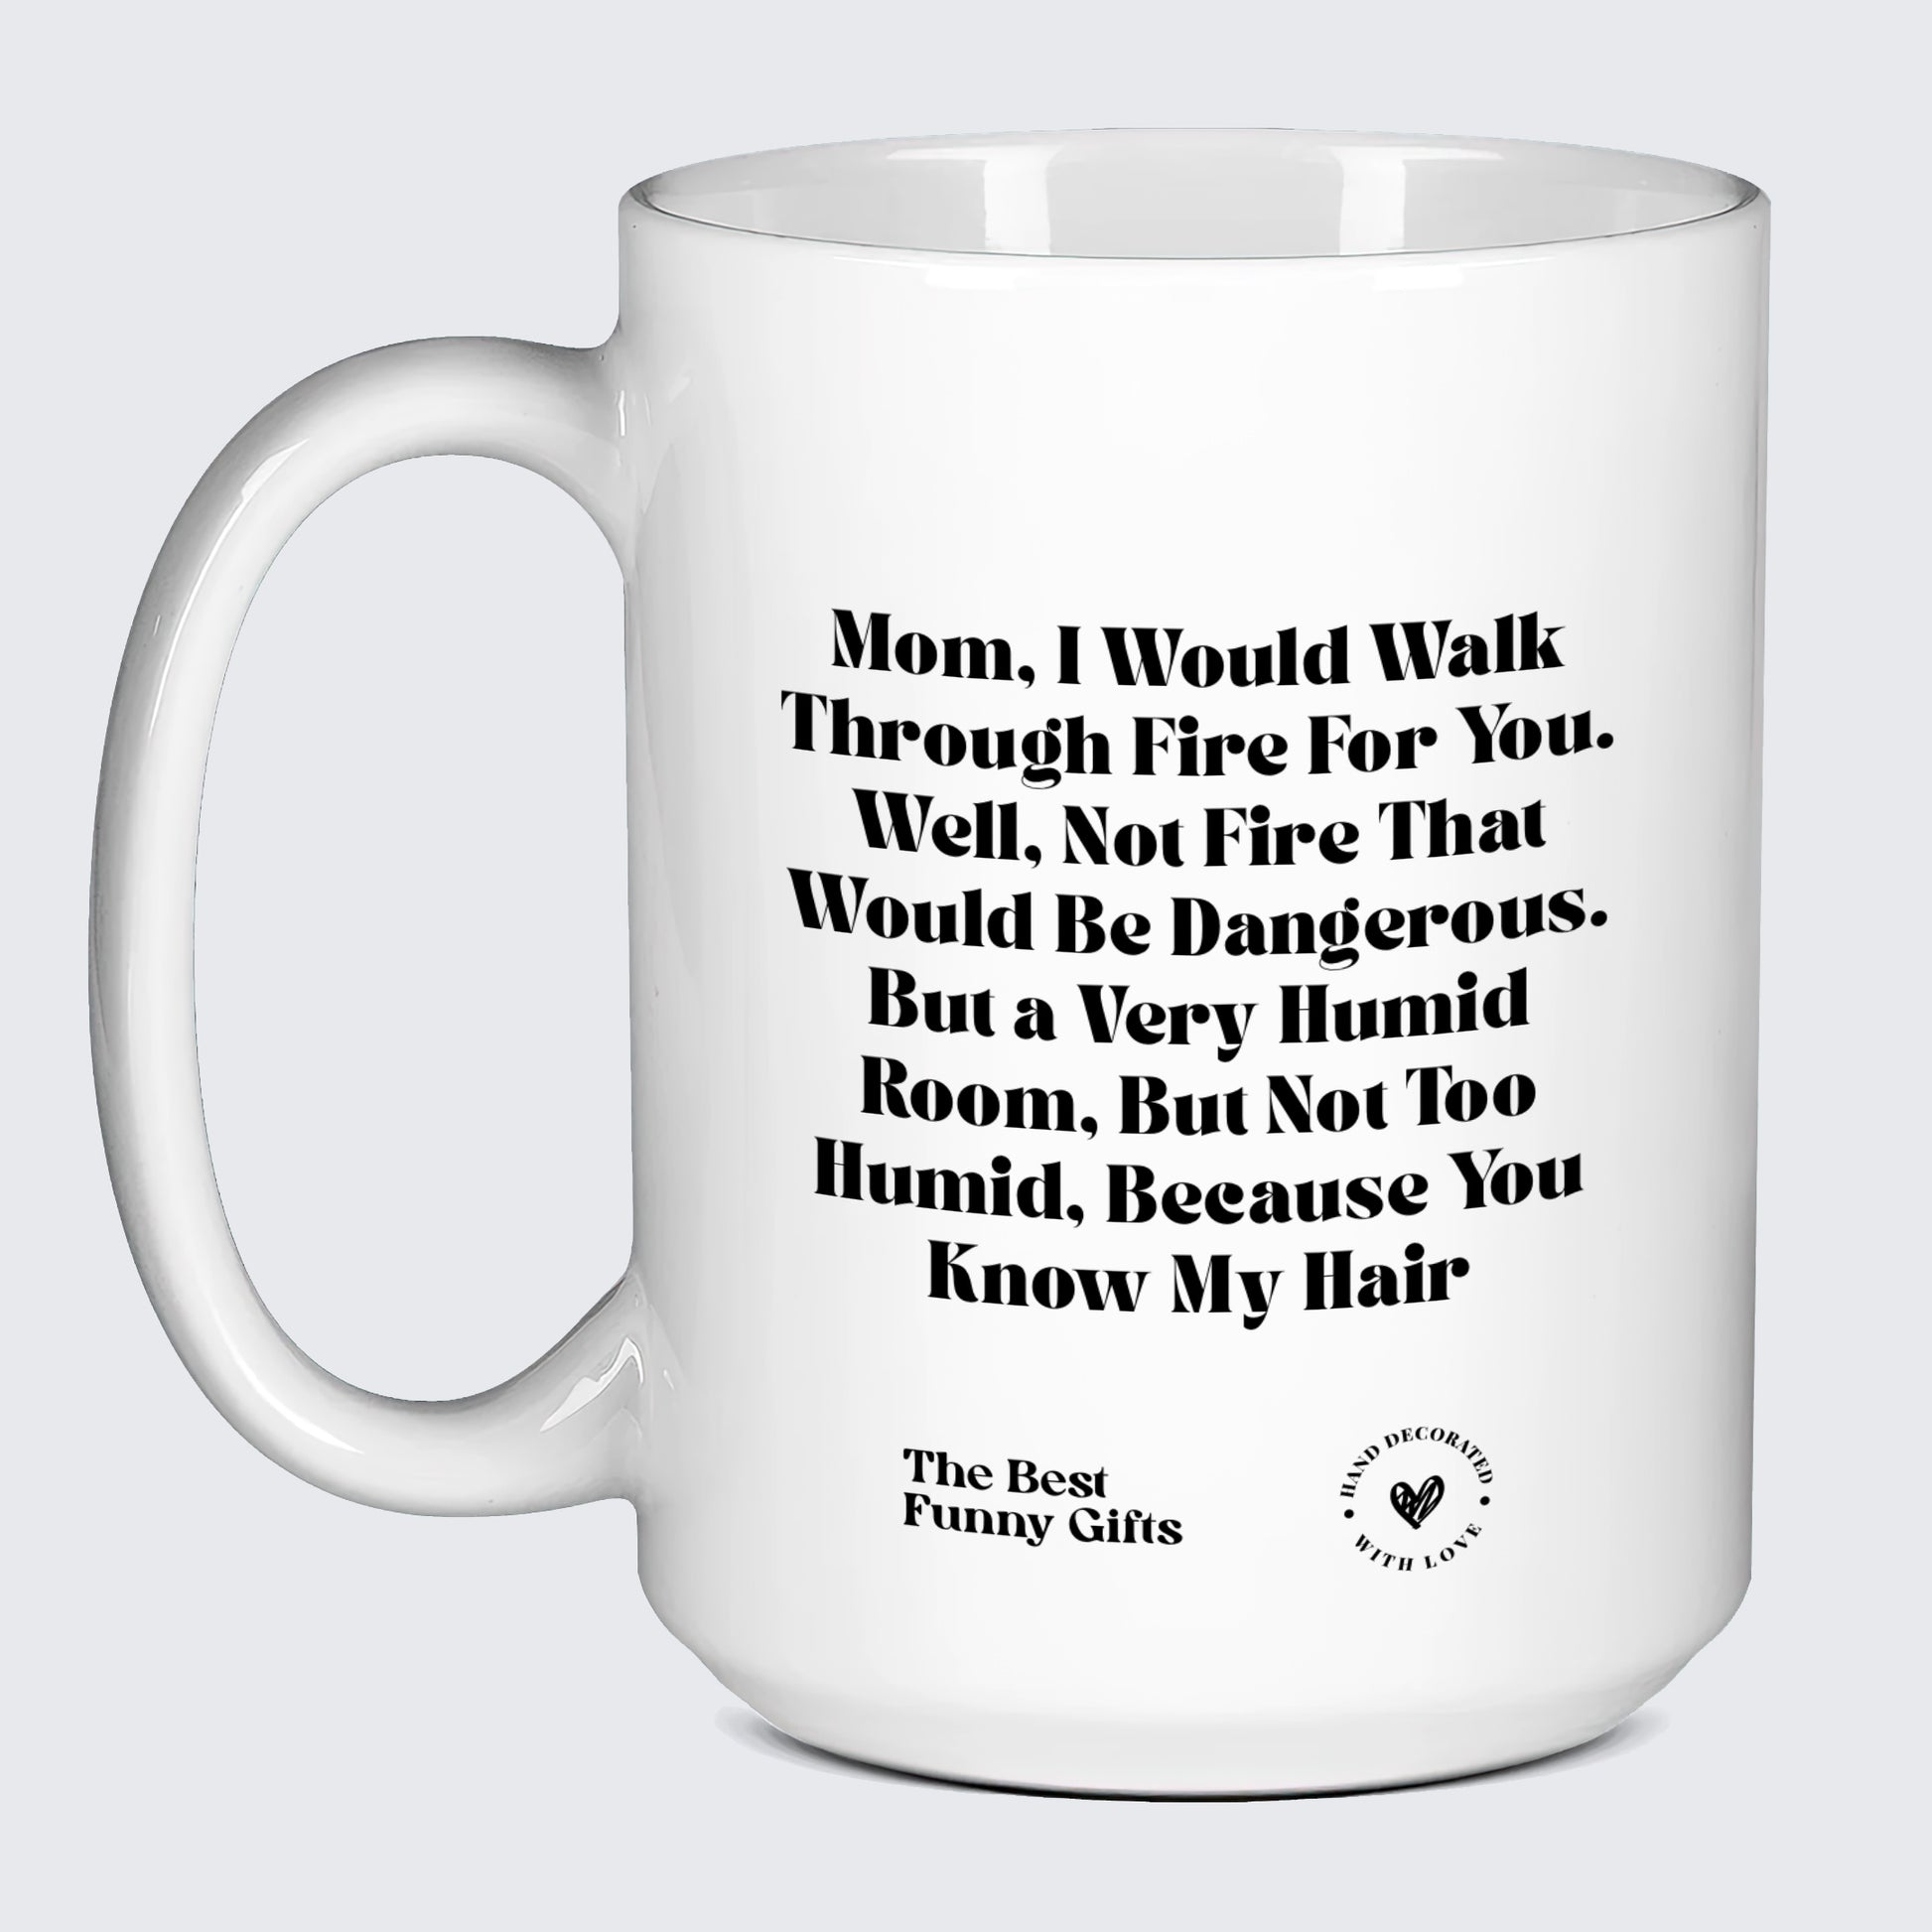 Mugs For Mom Mom, I Would Walk Through Fire for You. Well, Not Fire That Would Be Dangerous. But a Very Humid Room, but Not Too Humid, Because You Know My Hair - The Best Funny Gifts